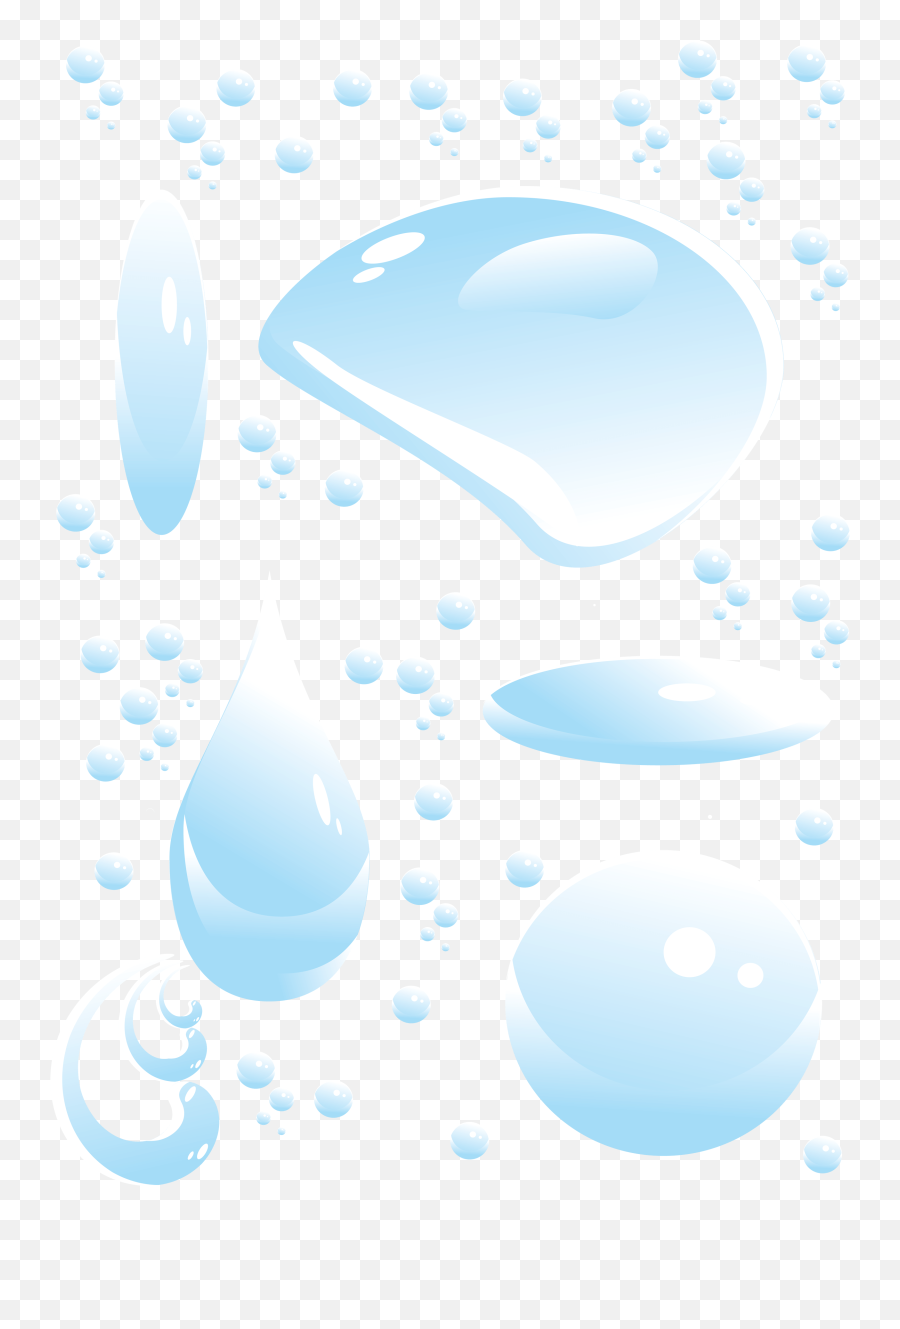 Png Image Icon Favicon - Portable Network Graphics,Water Drops Png